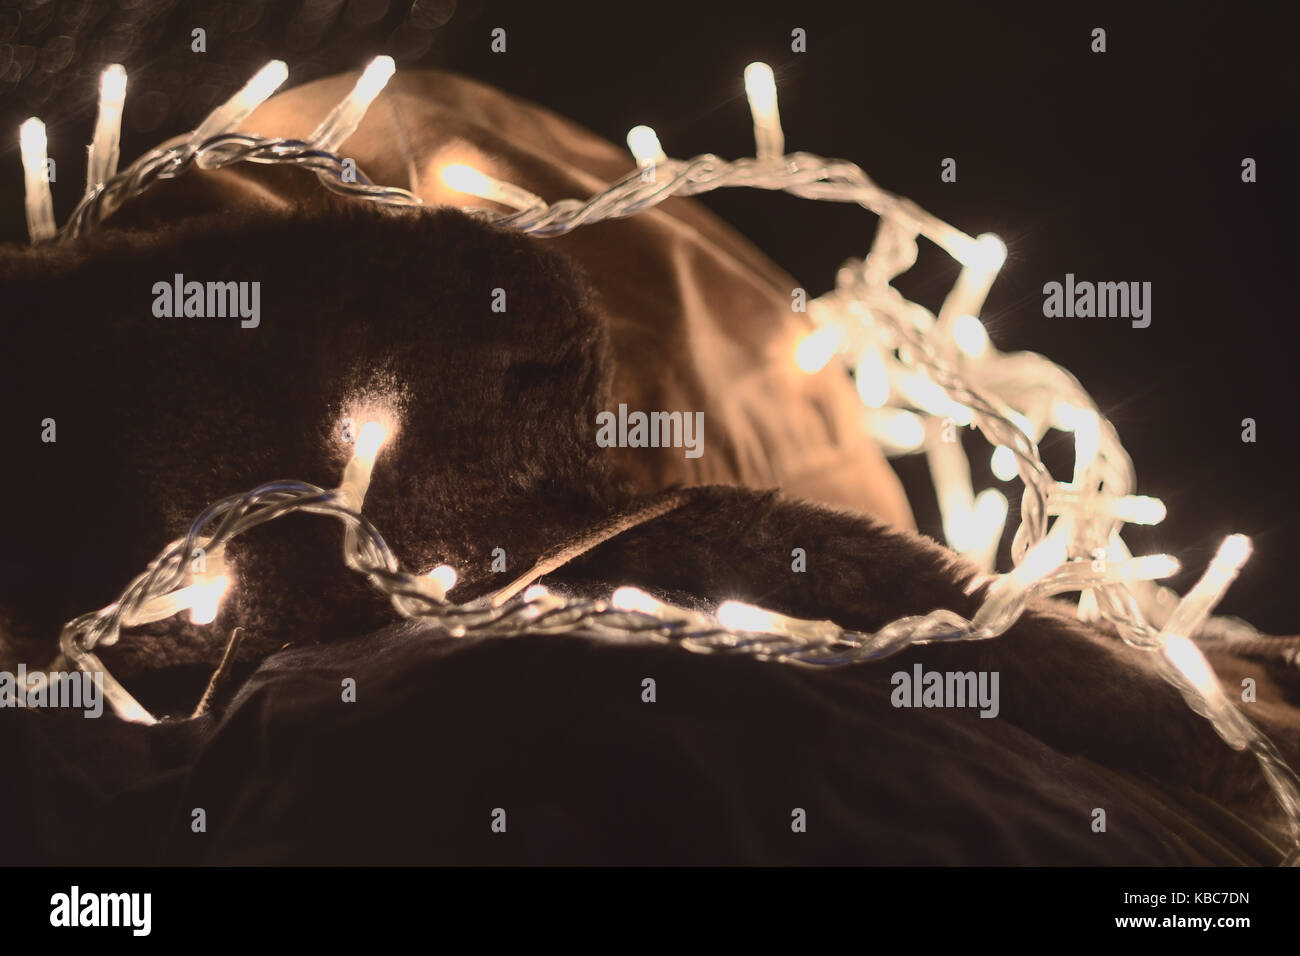 Abstract Shot Of Old Russian Ushanka Hat Covered In Glowing White Christmas Lights During Night Stock Photo